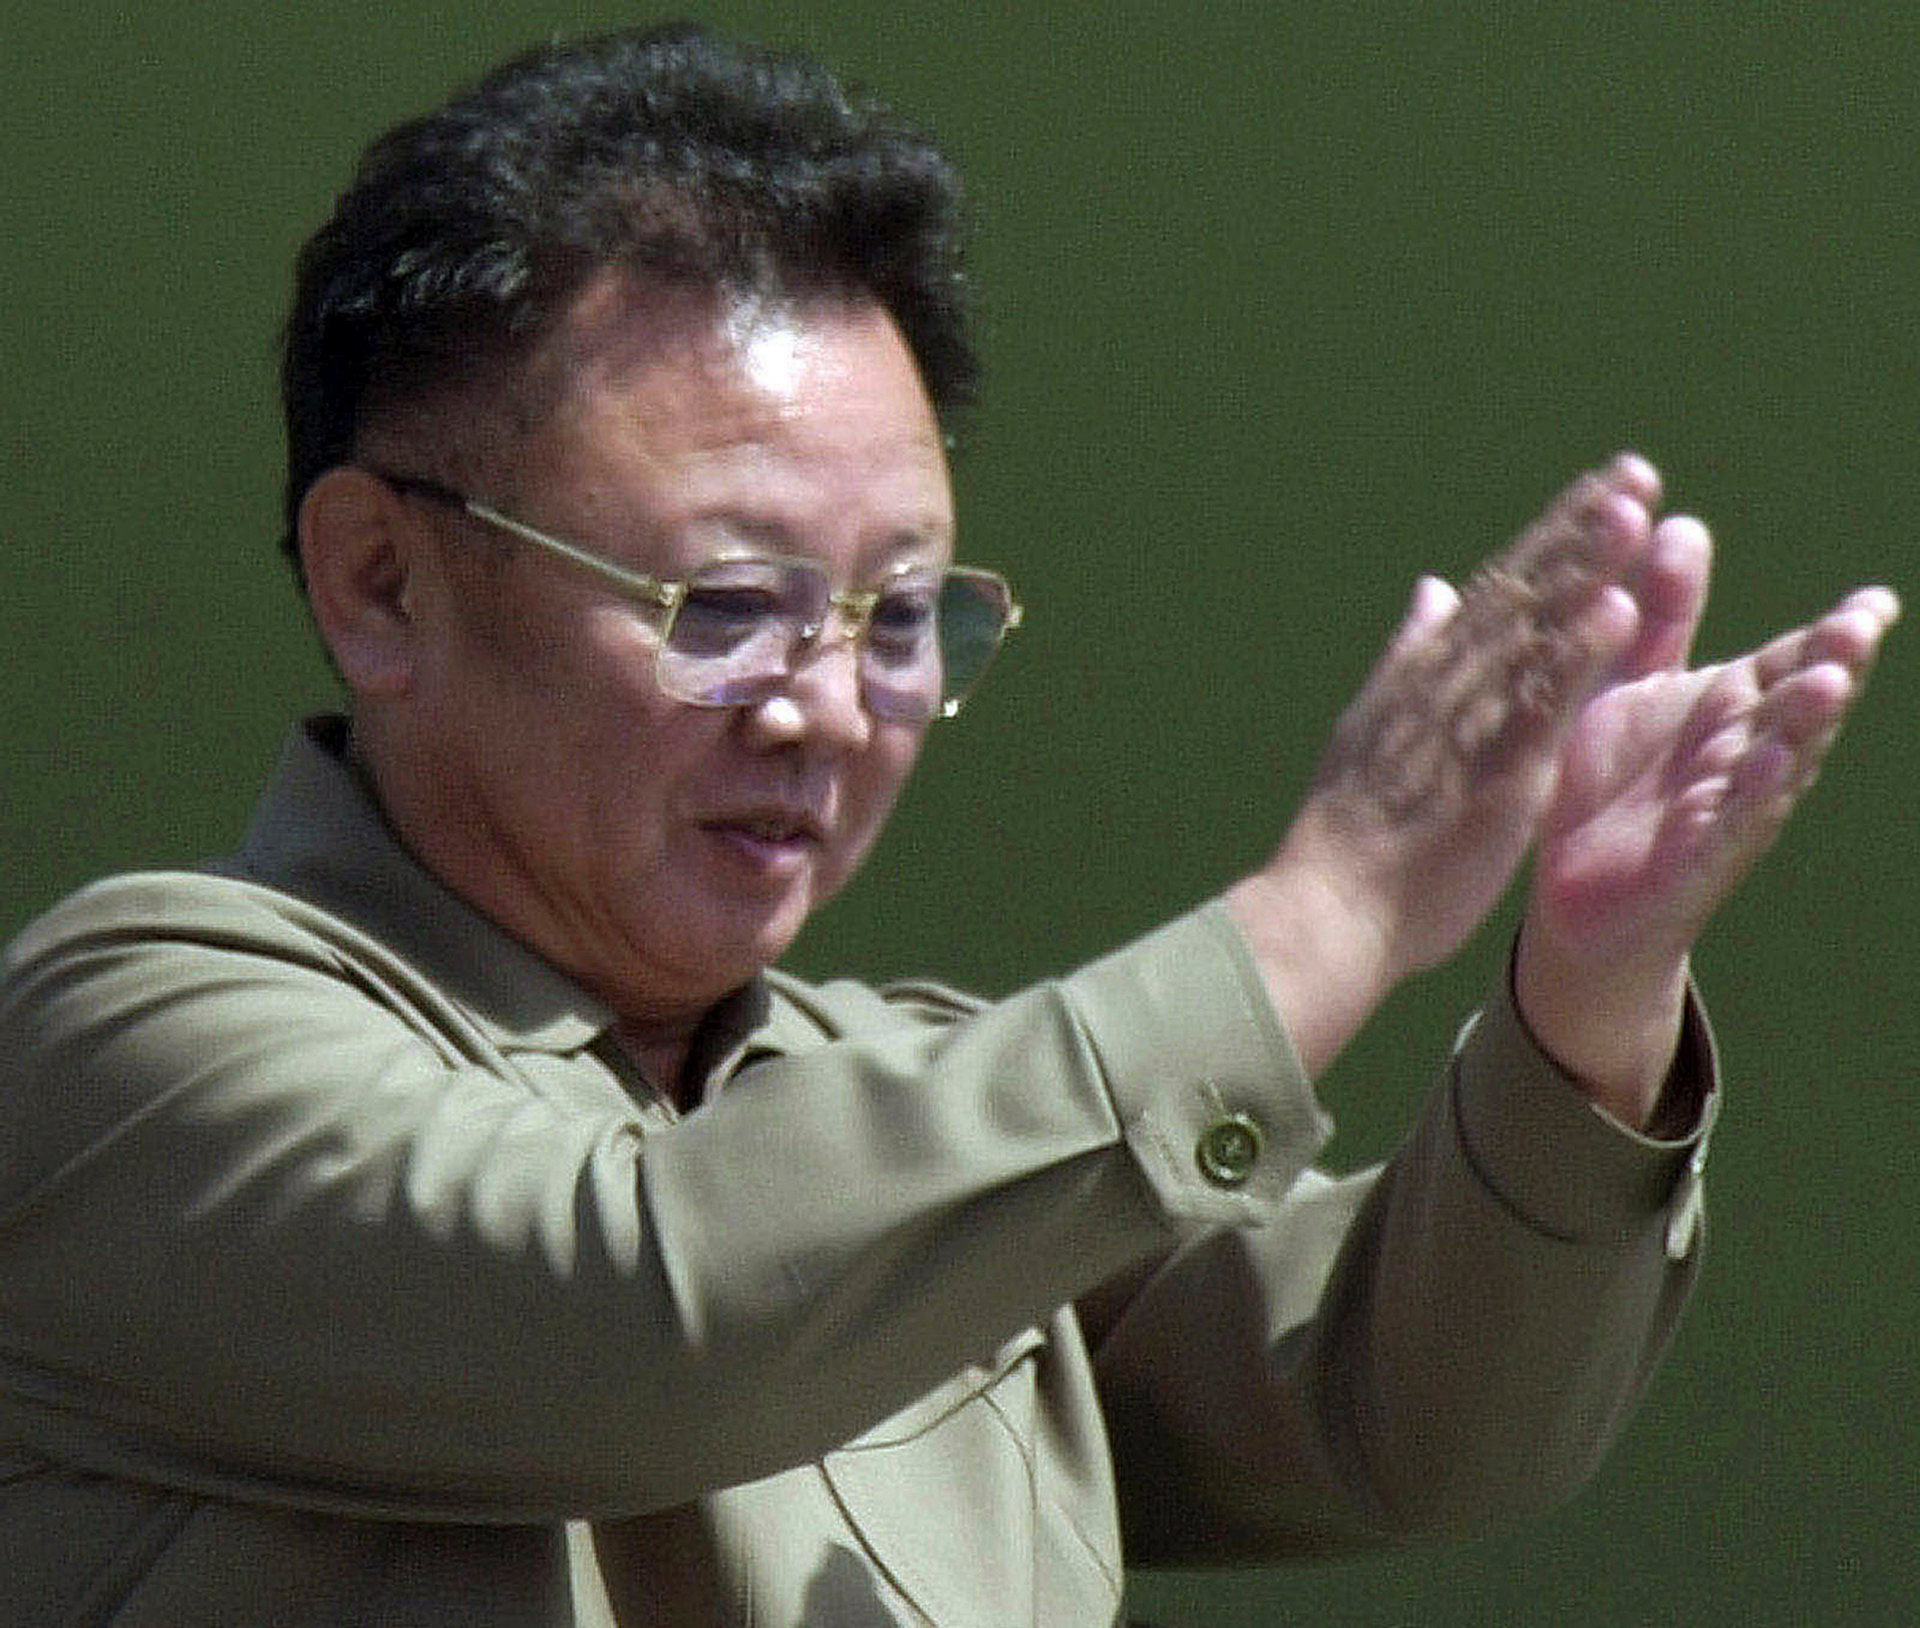 North Koreans banned from laughing celebrating birthdays to mark anniversary of Kim Jong Il’s death – Fox News